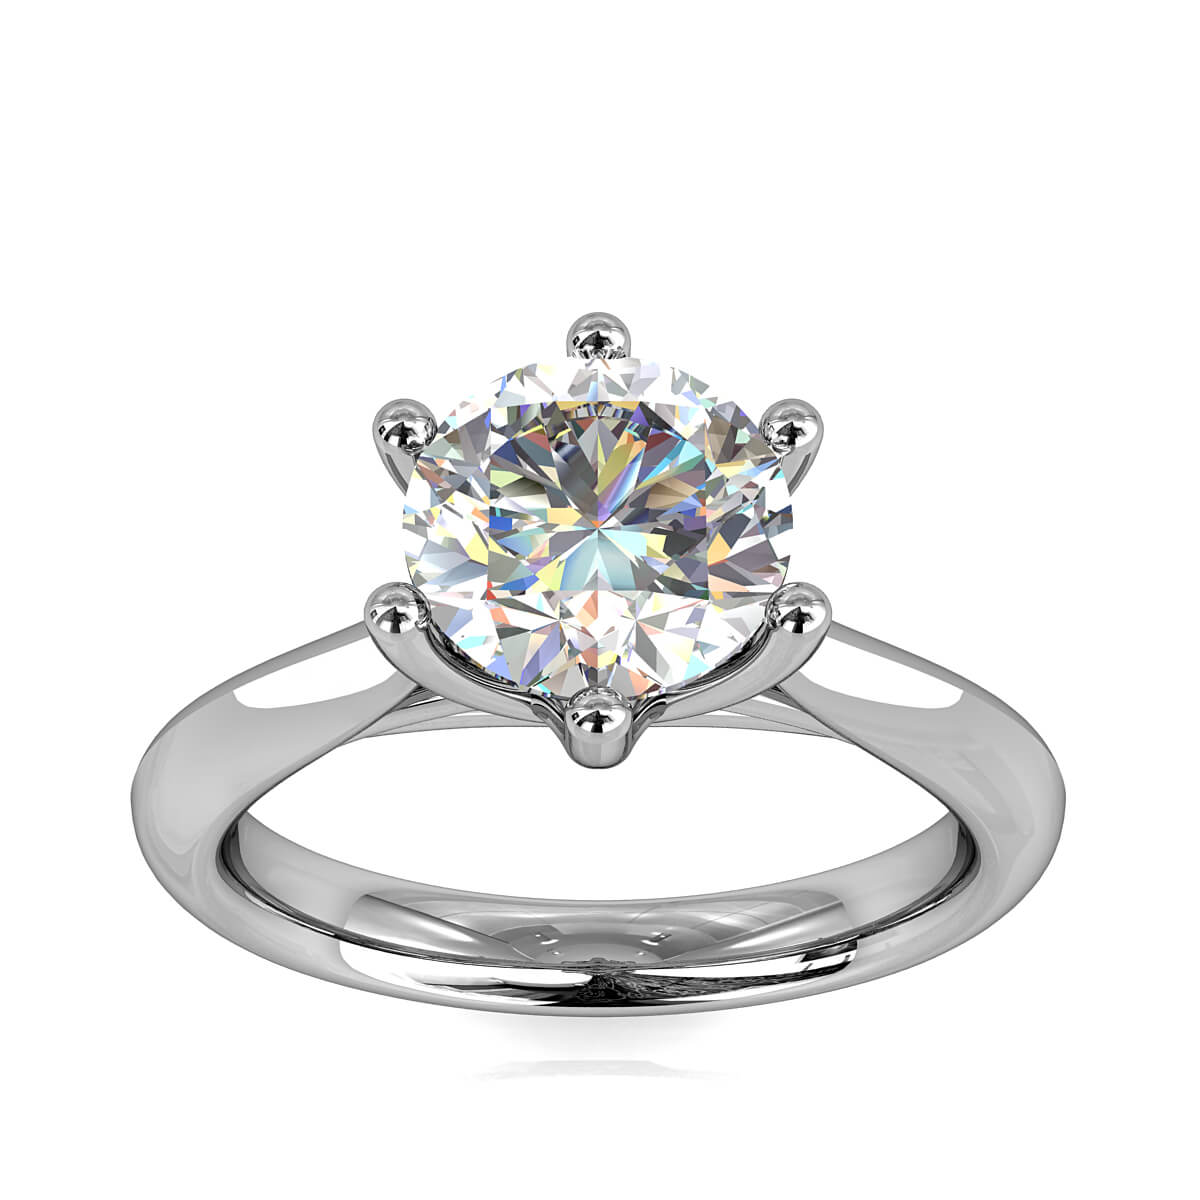 Round Brilliant Cut Solitaire Diamond Engagement Ring, 6 Button Claws on Rounded Tapered Band with Lotus Undersweep Setting.